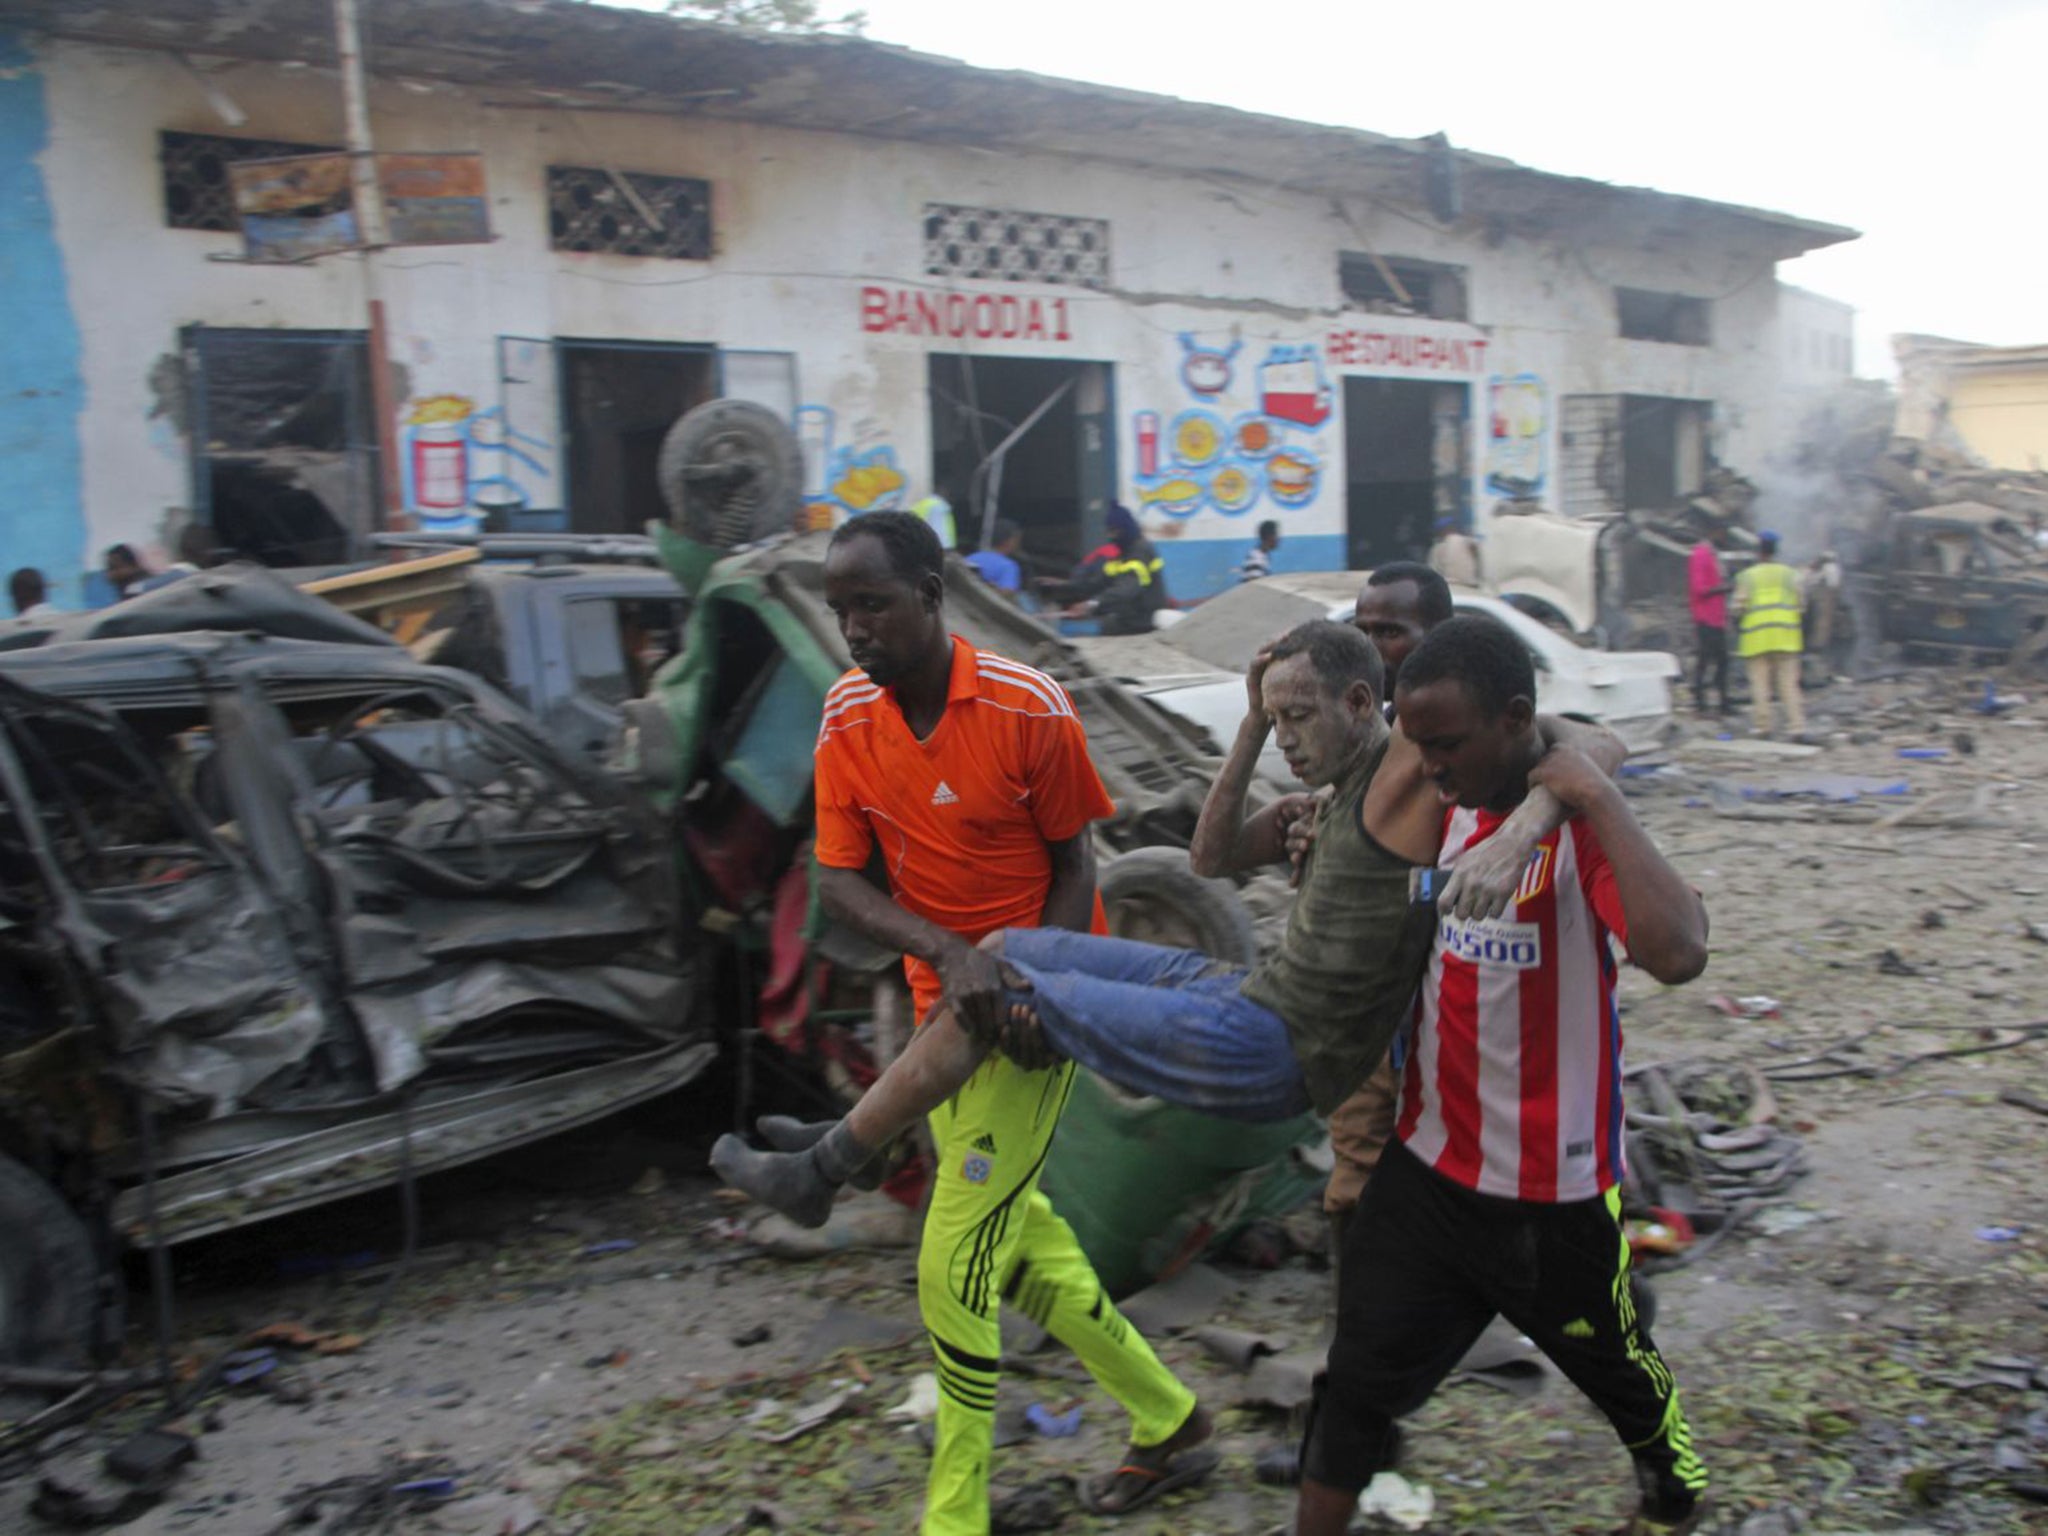 Somalis carry away a man injured after the car bomb attack